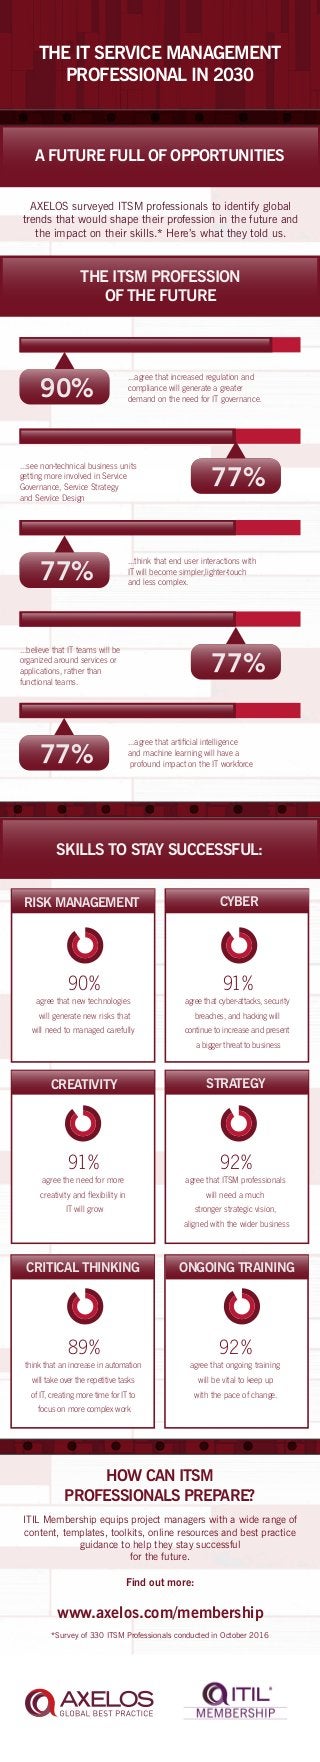 THE IT SERVICE MANAGEMENT
PROFESSIONAL IN 2030
AXELOS surveyed ITSM professionals to identify global
trends that would shape their profession in the future and
the impact on their skills.* Here’s what they told us.
ITIL Membership equips project managers with a wide range of
content, templates, toolkits, online resources and best practice
guidance to help they stay successful
for the future.
Find out more:
www.axelos.com/membership
*Survey of 330 ITSM Professionals conducted in October 2016
HOW CAN ITSM
PROFESSIONALS PREPARE?
90%
agree that new technologies
will generate new risks that
will need to managed carefully
91%
agree that cyber-attacks, security
breaches, and hacking will
continue to increase and present
a bigger threat to business
92%
agree that ITSM professionals
will need a much
stronger strategic vision,
aligned with the wider business
91%
agree the need for more
creativity and flexibility in
IT will grow
89%
think that an increase in automation
will take over the repetitive tasks
of IT, creating more time for IT to
focus on more complex work
92%
agree that ongoing training
will be vital to keep up
with the pace of change.
...agree that increased regulation and
compliance will generate a greater
demand on the need for IT governance.
...see non-technical business units
getting more involved in Service
Governance, Service Strategy
and Service Design
...think that end user interactions with
IT will become simpler,lighter-touch
and less complex.
...believe that IT teams will be
organized around services or
applications, rather than
functional teams.
...agree that artificial intelligence
and machine learning will have a
profound impact on the IT workforce
THE ITSM PROFESSION
OF THE FUTURE
SKILLS TO STAY SUCCESSFUL:
CREATIVITY STRATEGY
CRITICAL THINKING ONGOING TRAINING
RISK MANAGEMENT CYBER
90%
77%
77%
77%
77%
A FUTURE FULL OF OPPORTUNITIES
 